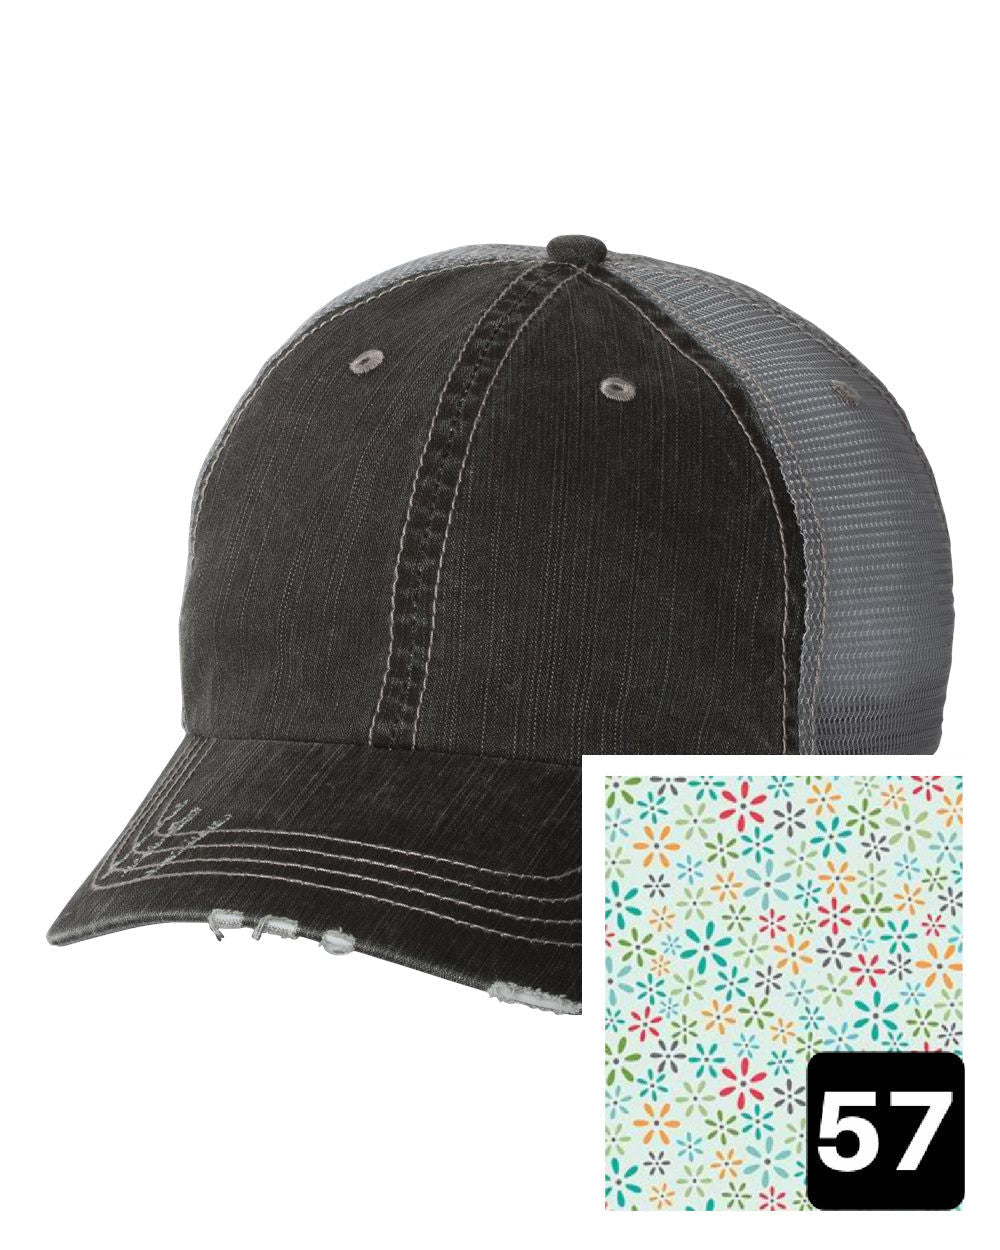 gray distressed trucker hat with white daisy on yellow fabric state of Texas